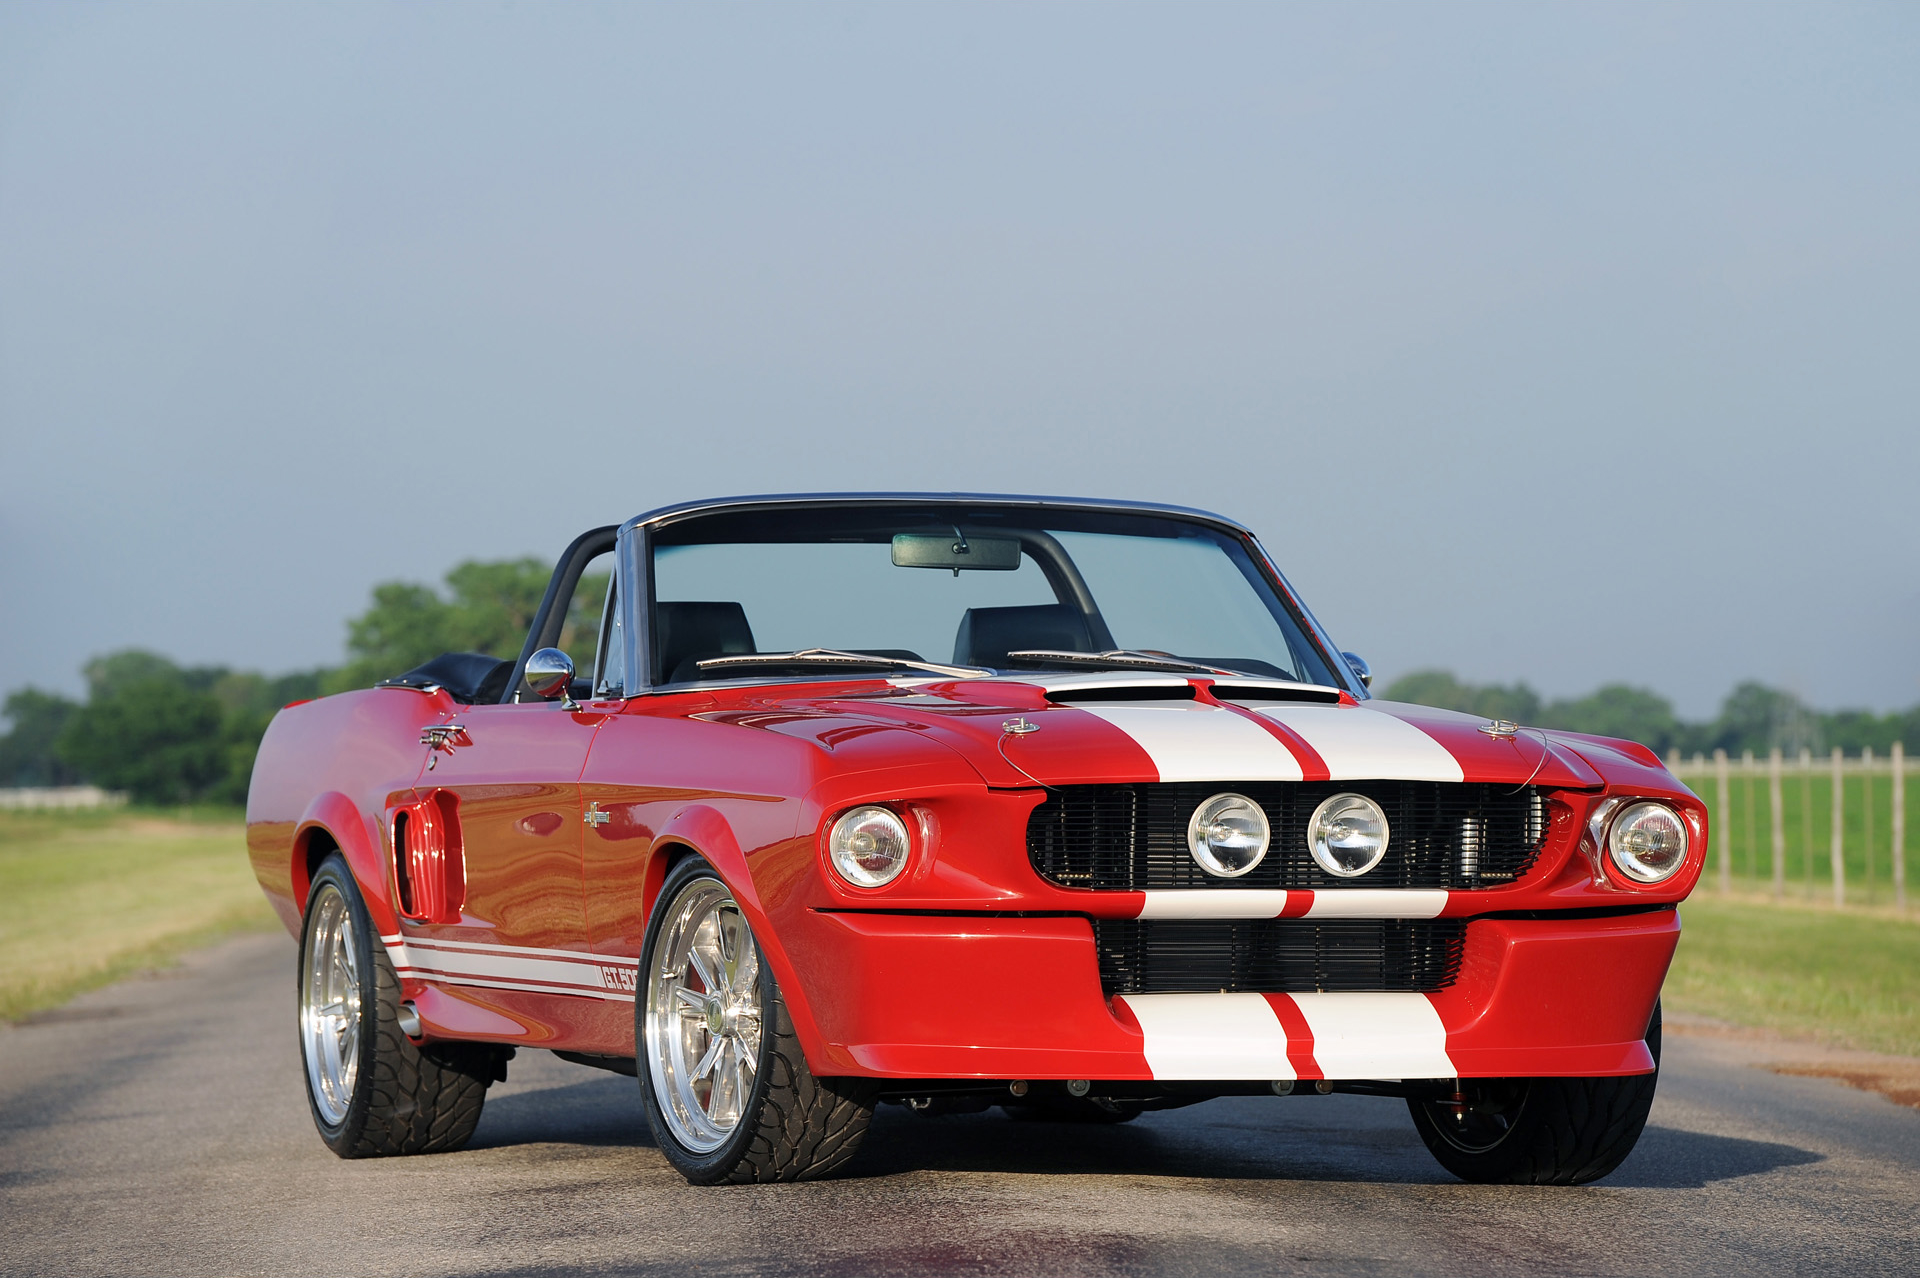 vehicles, shelby gt500 classic recreation, classic car, convertible, muscle car, ford HD for desktop 1080p